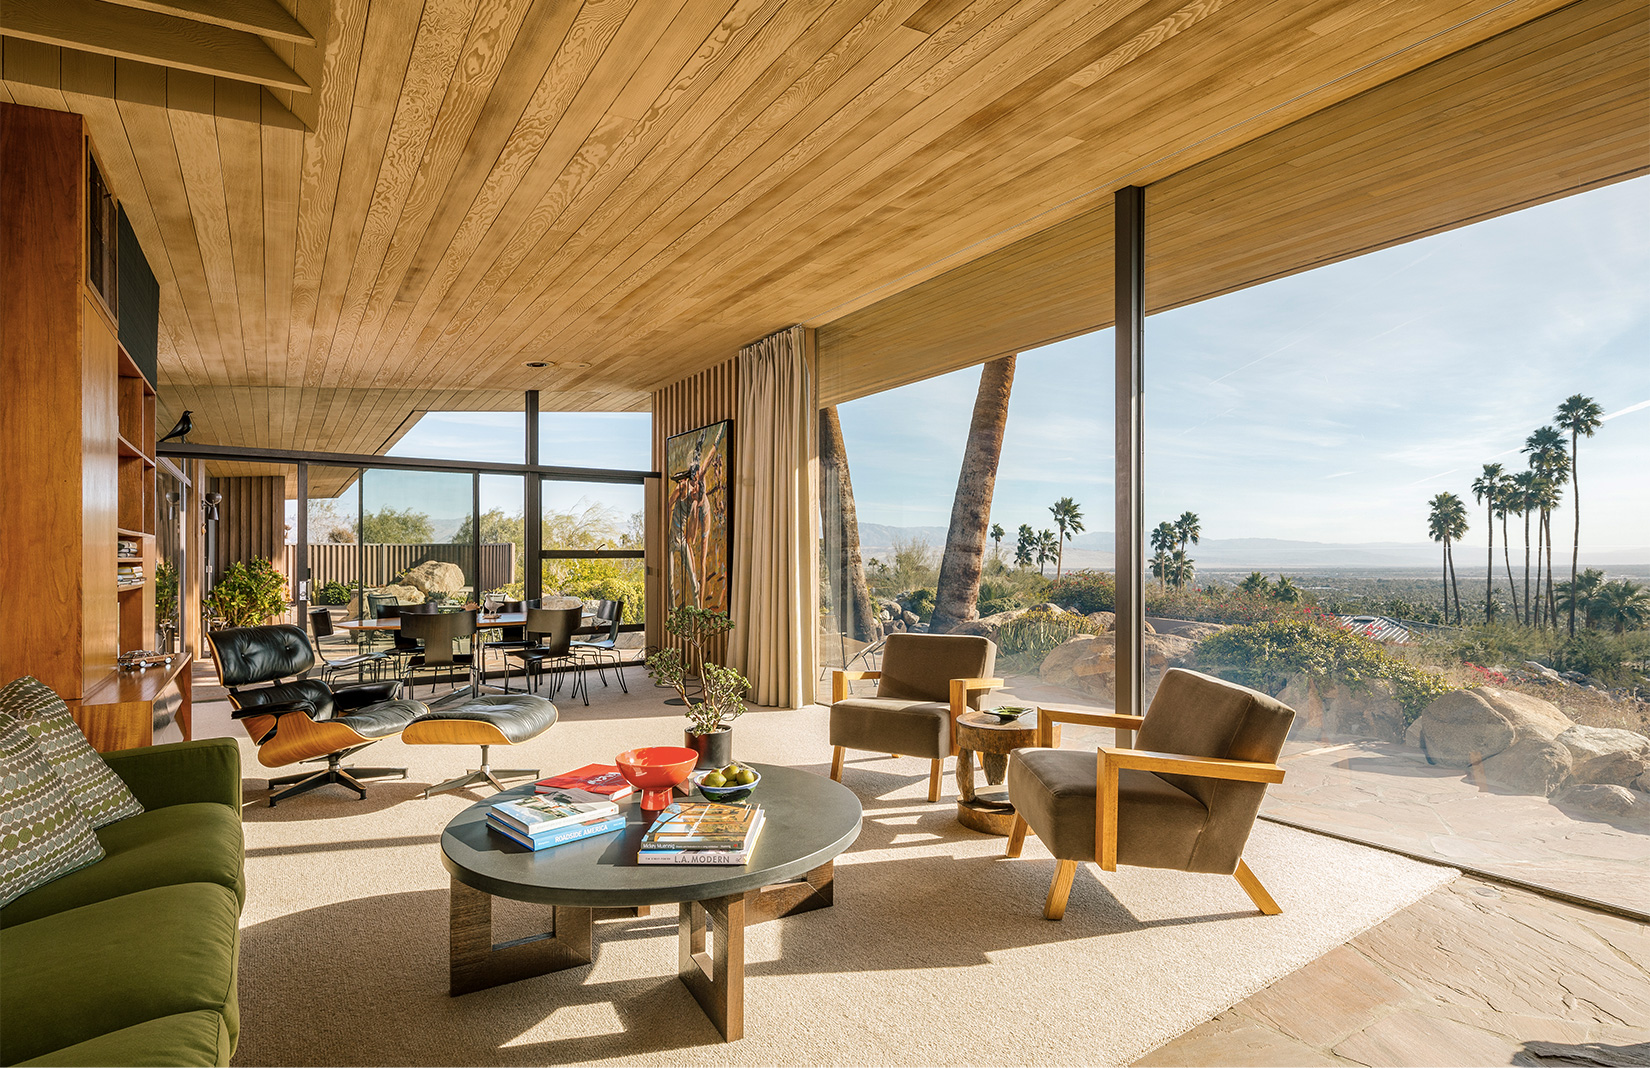 6 Spectacular Palm Springs Homes For Sale Right Now